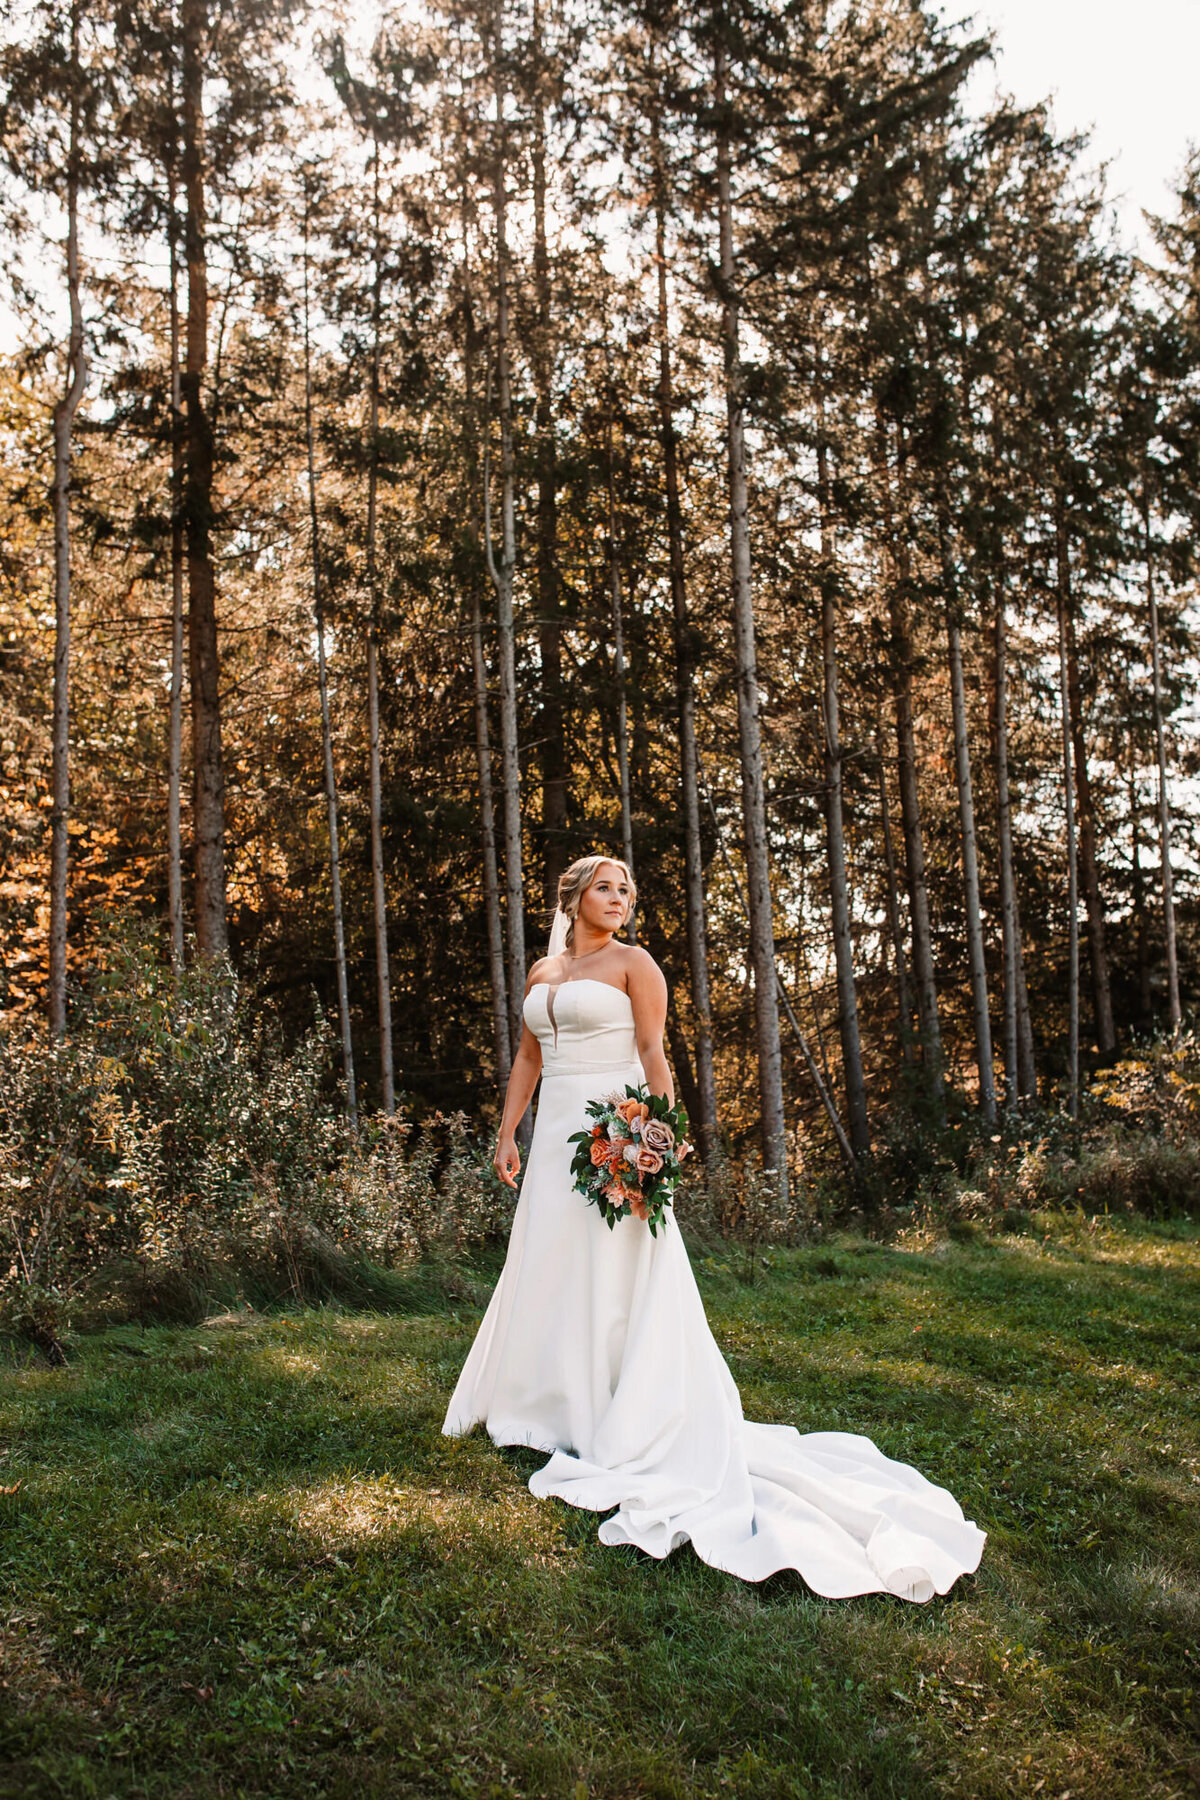 bride stands alone in front of forest while holding flowers down at her side as she gazes into the distance